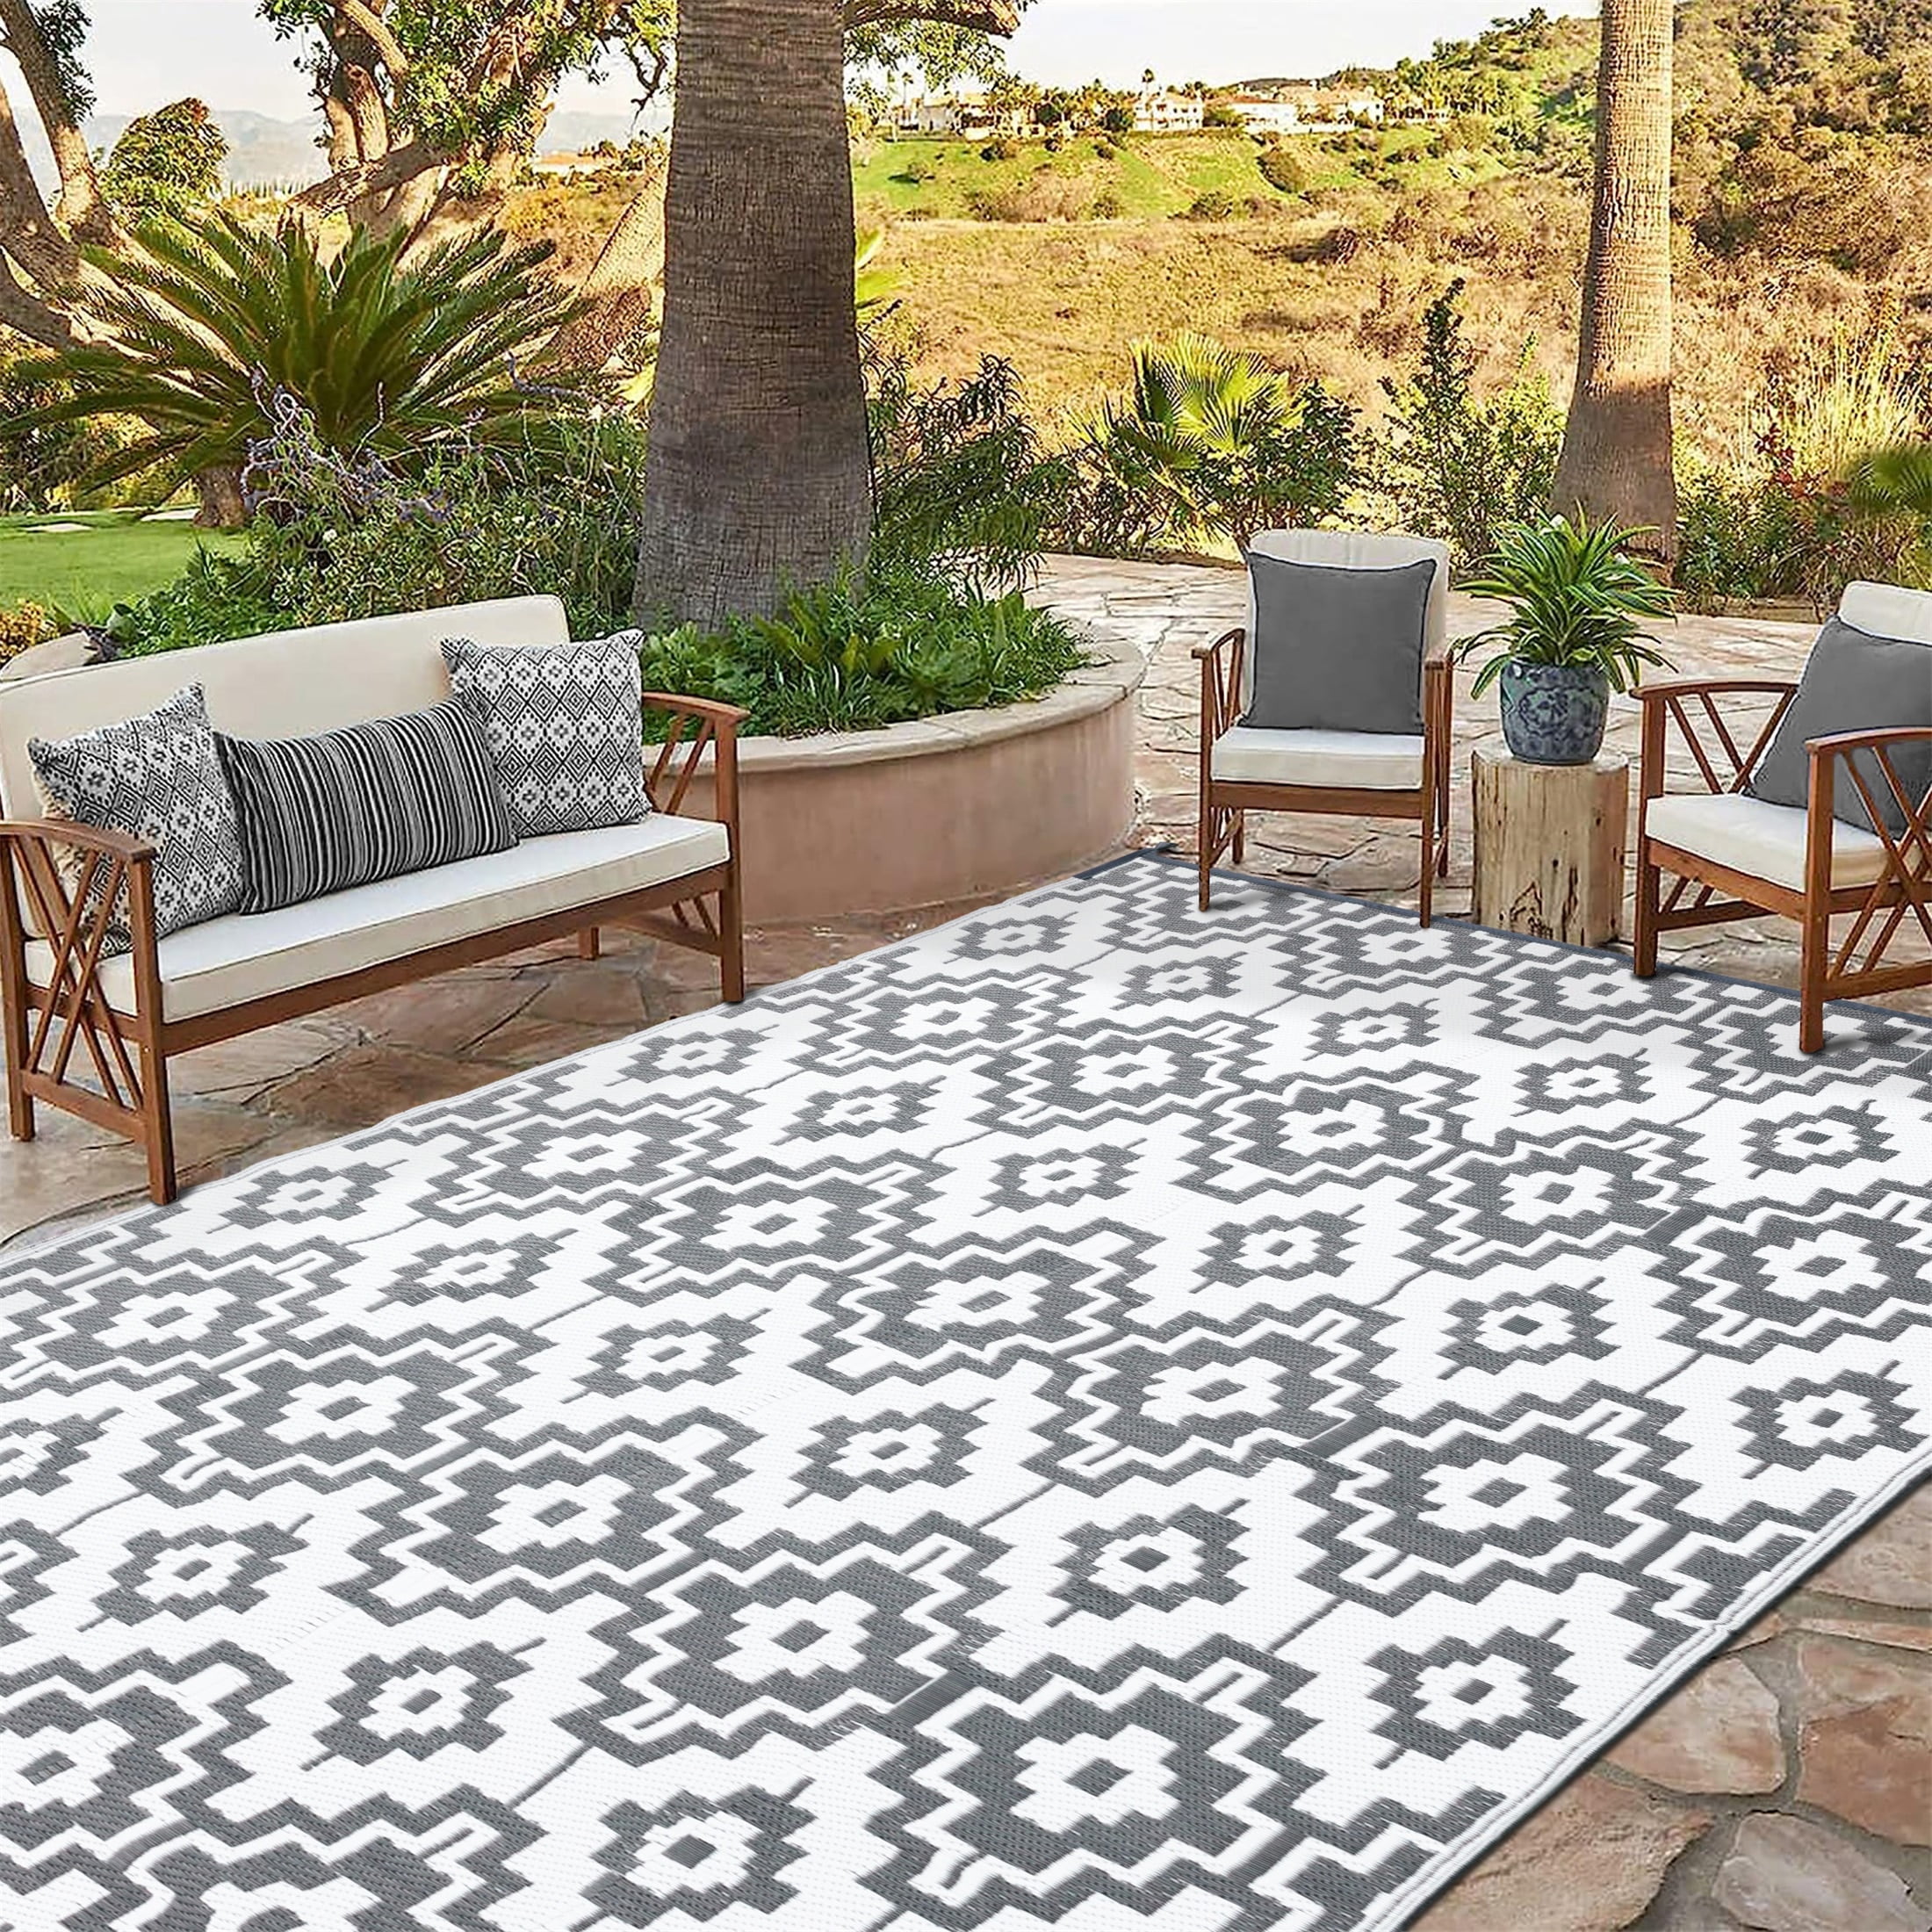 SIXHOME Outdoor Rug Mat Non Slip Machine Washable Woven Rugs 5x8 ft Outdoor  Patio Rug Rubber Backed Geometric Outdoor Decorations for Deck Balcony